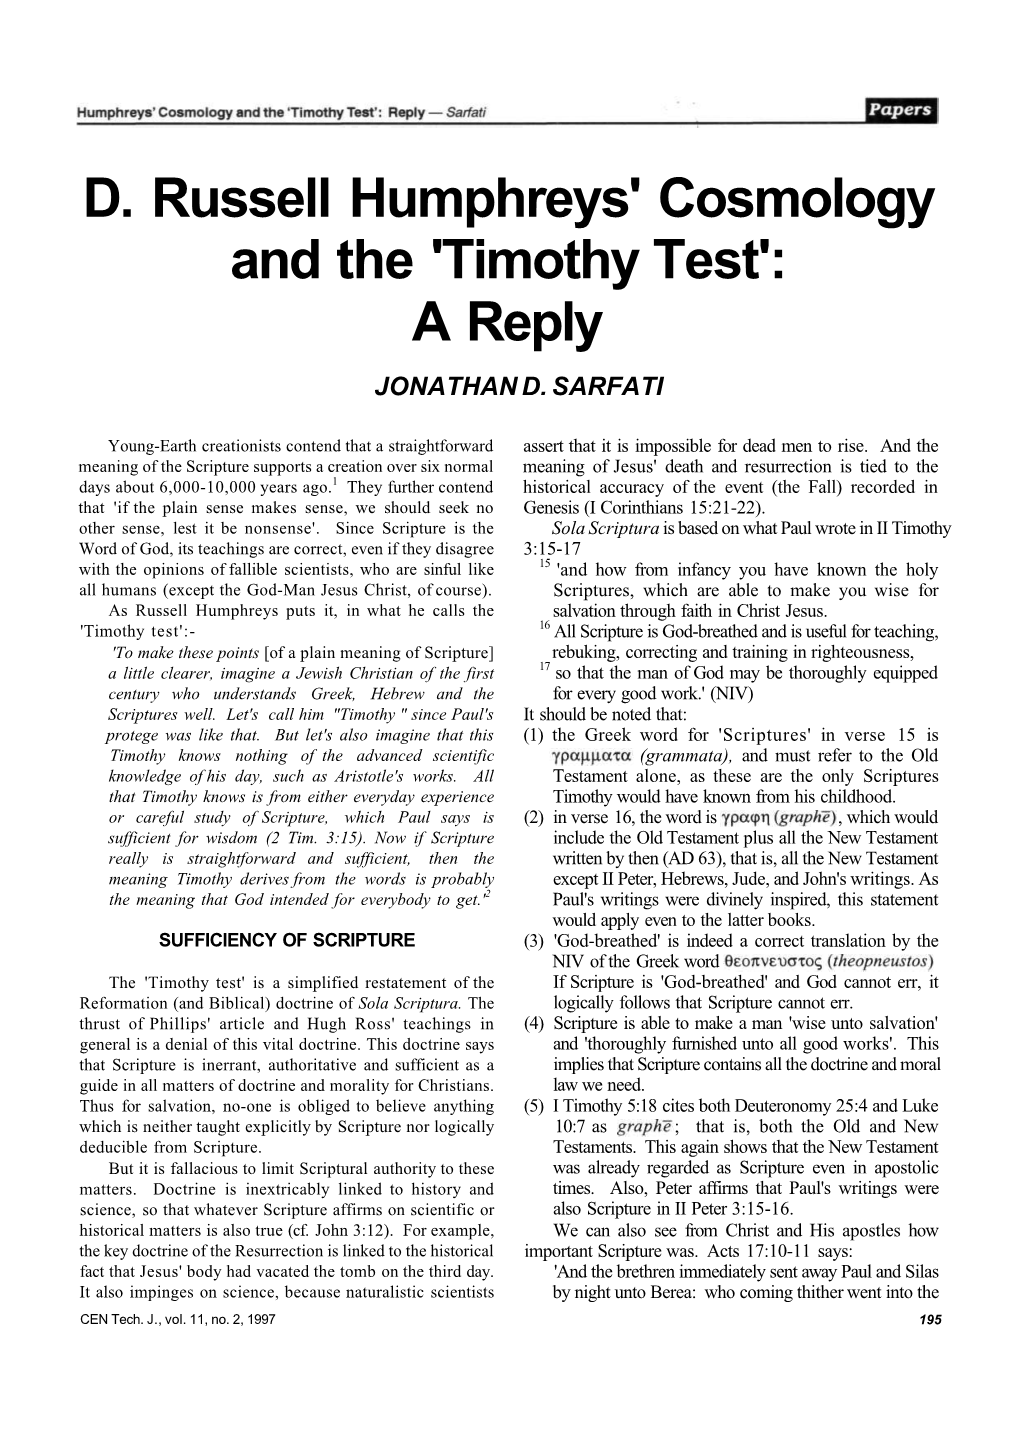 D. Russell Humphreys' Cosmology and the 'Timothy Test': a Reply JONATHAN D